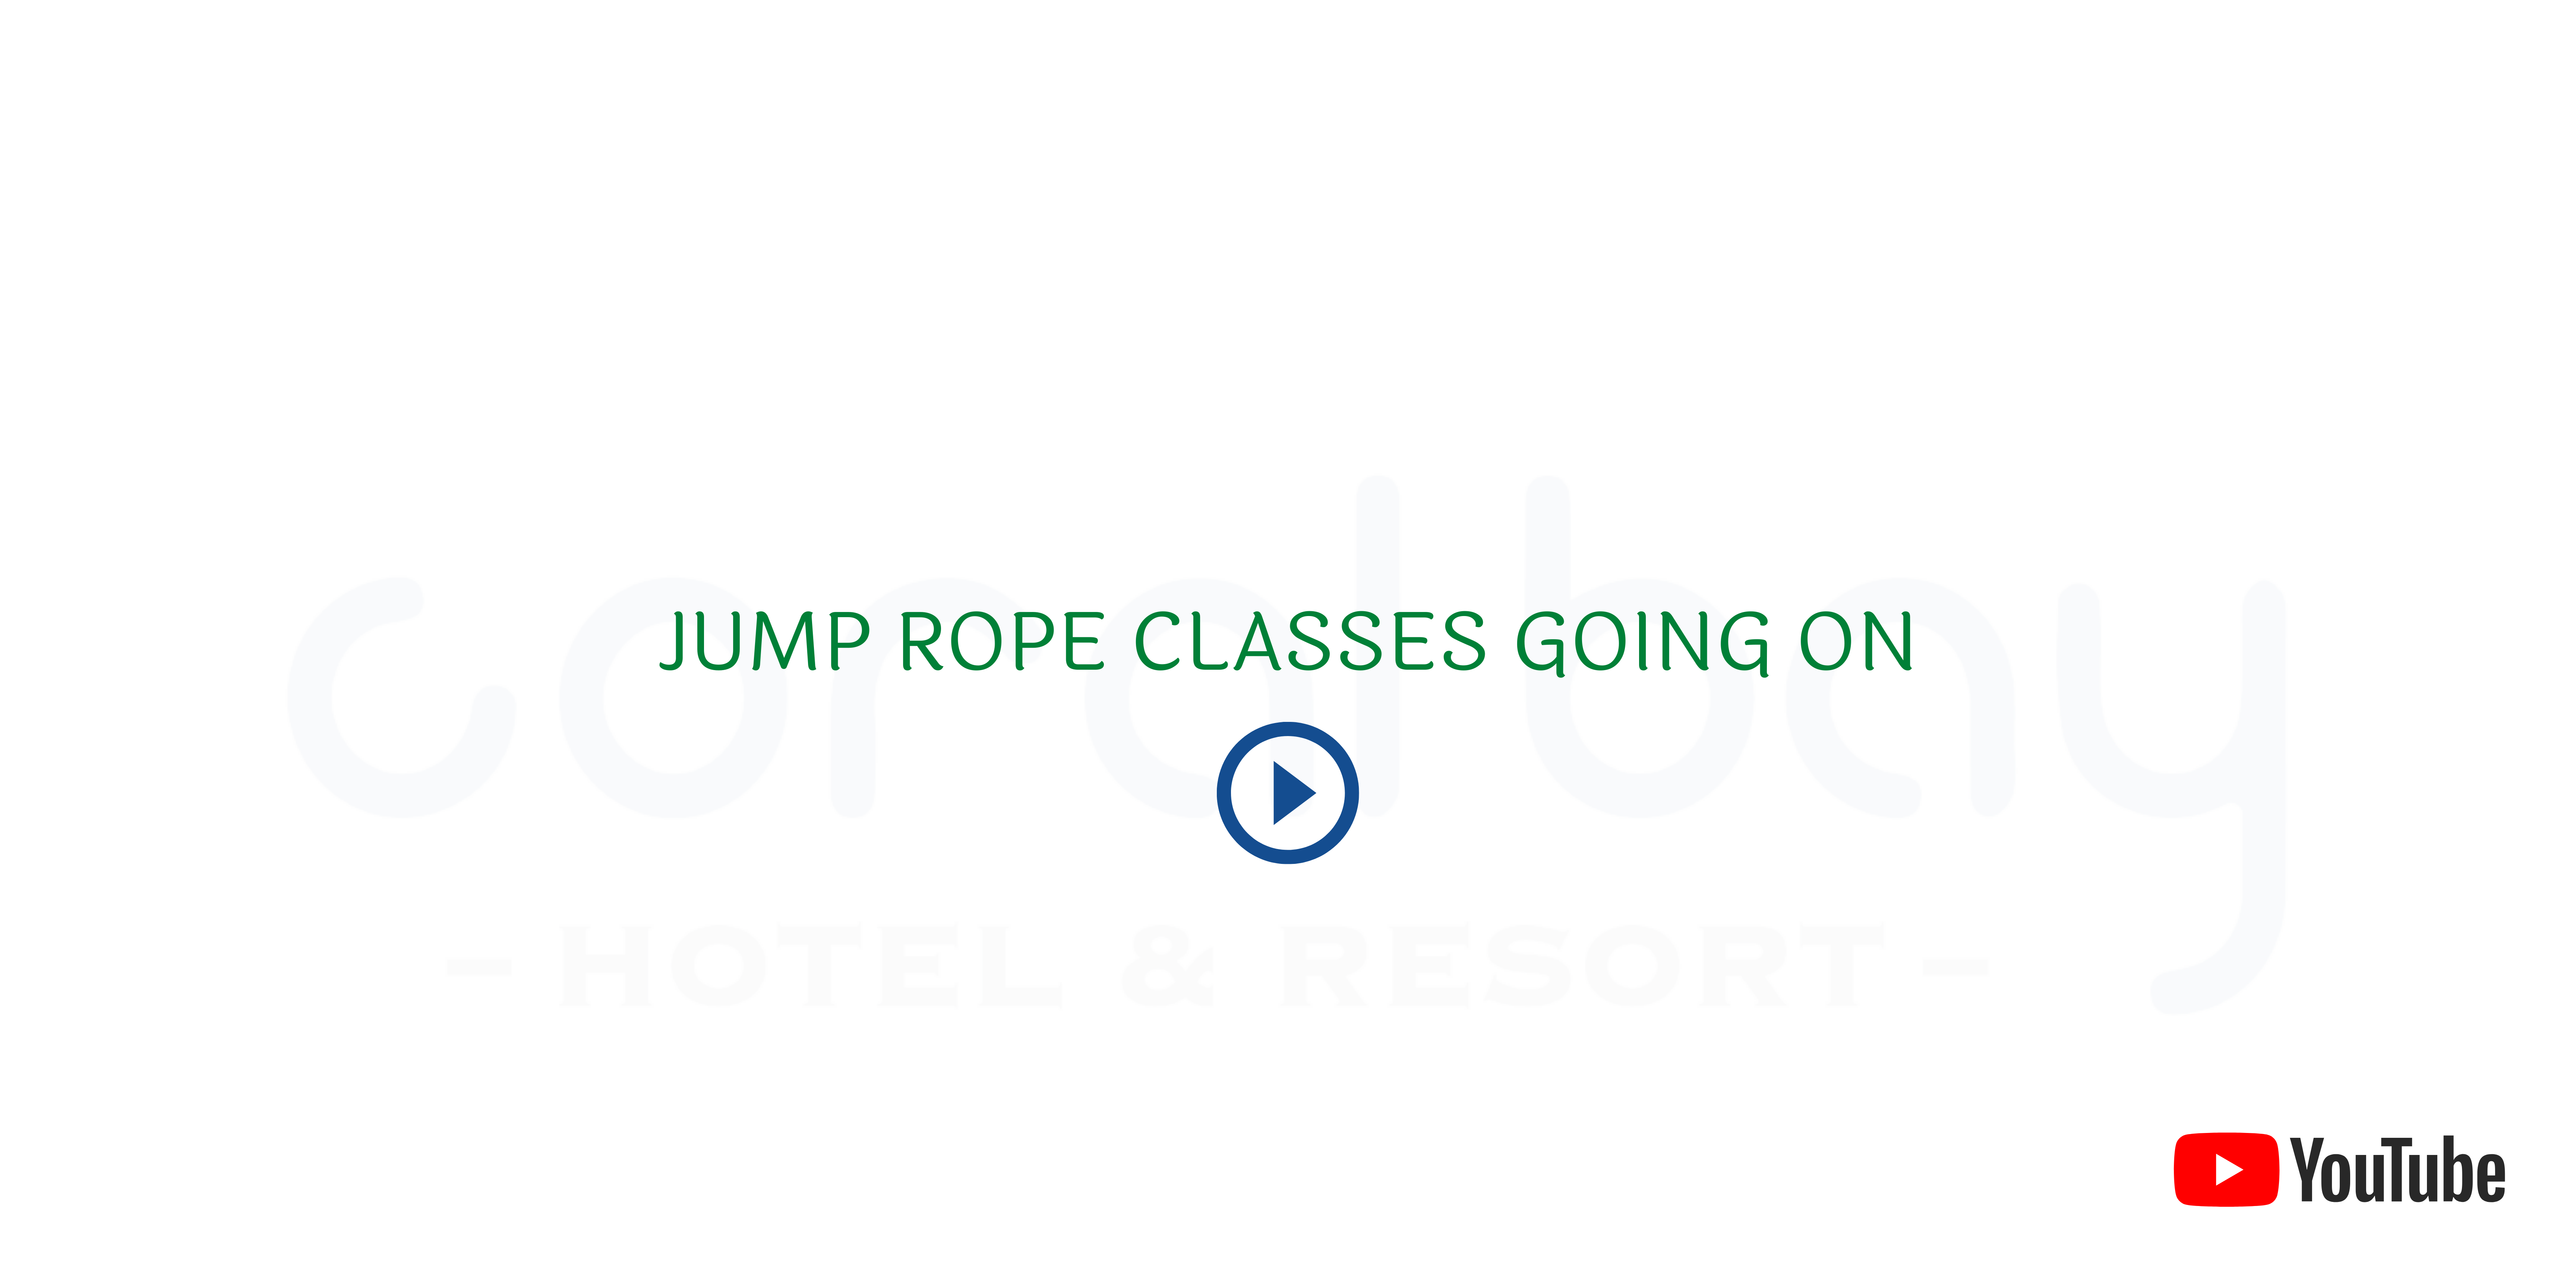 Sola Jump Role Classes in Bahrain- Coral Bay (2)